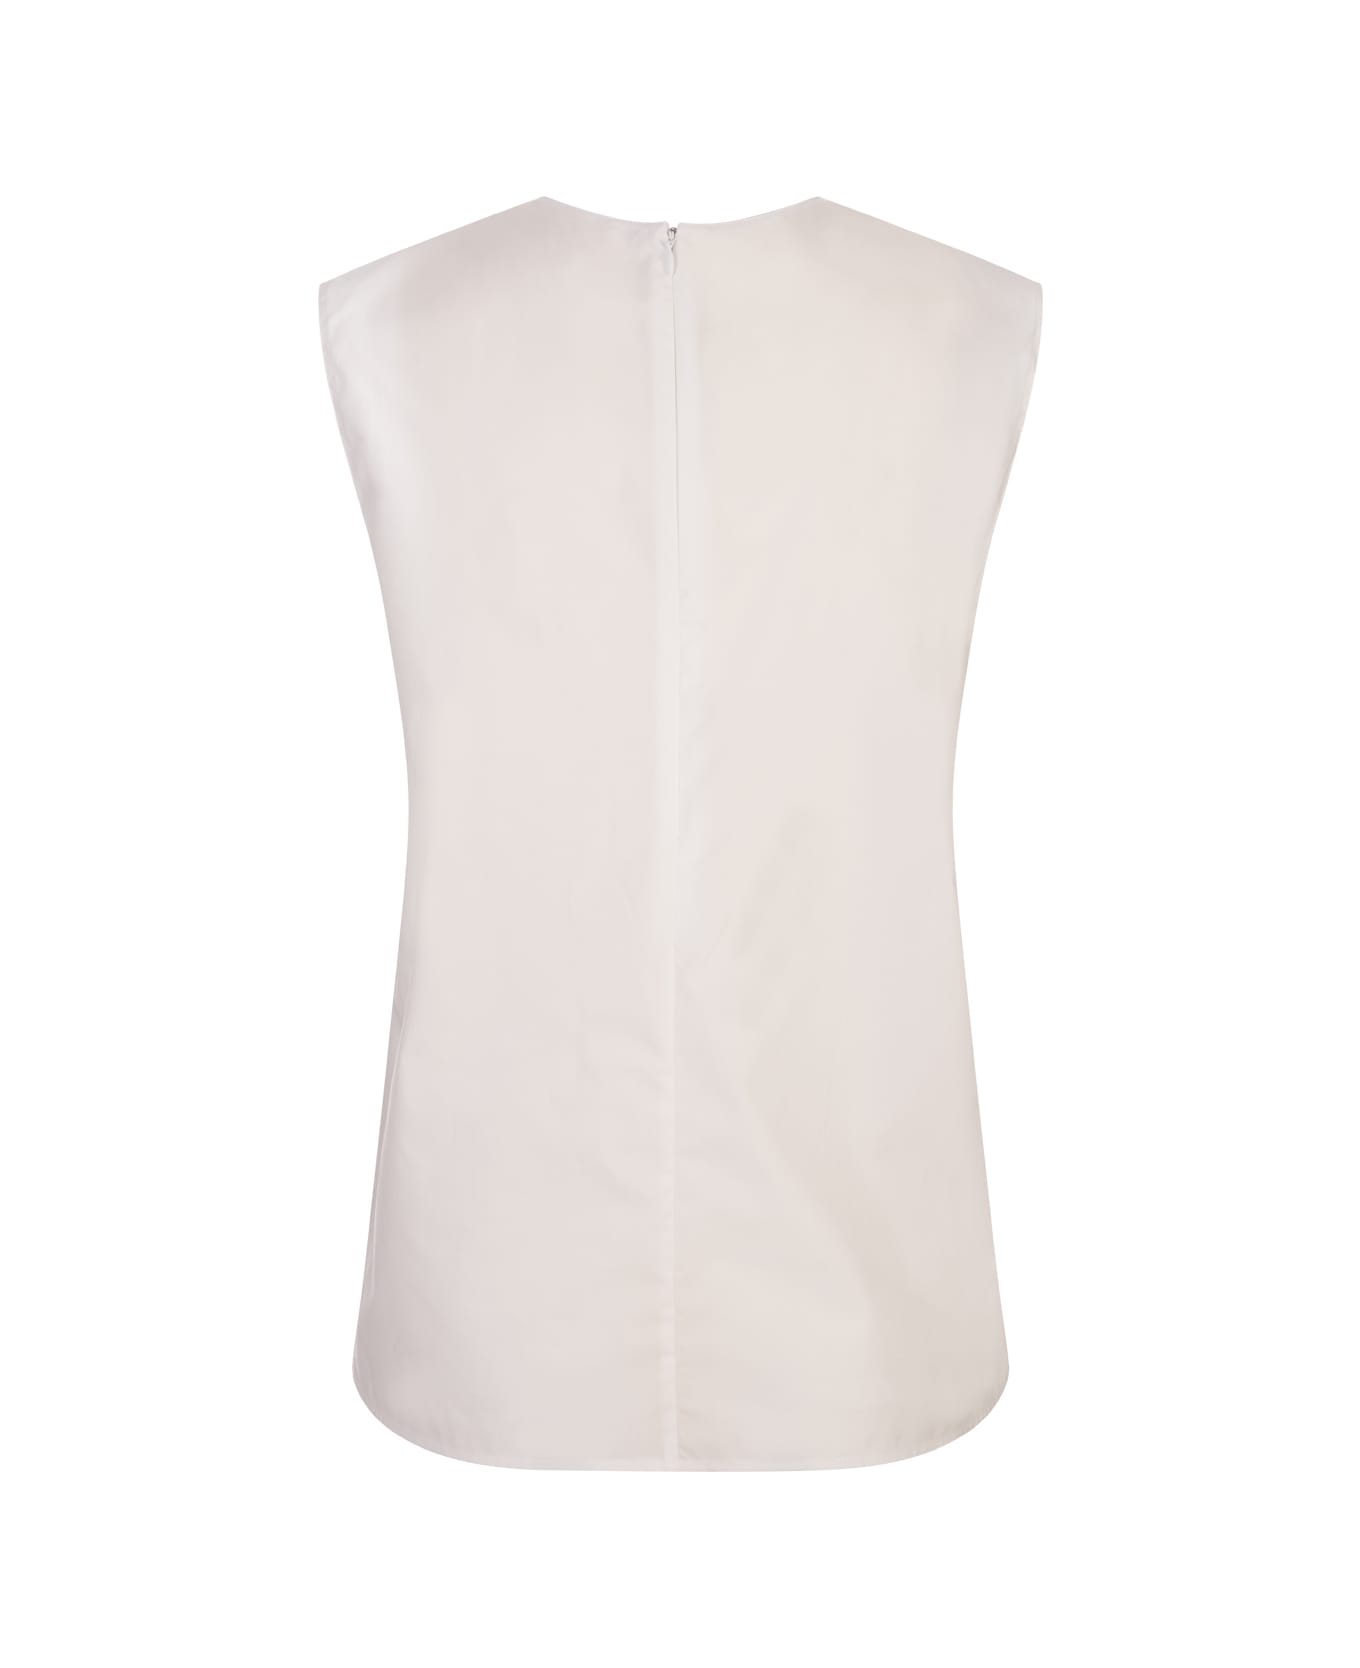 Marni Sleeveless Top With Mystical Bloom Print - White